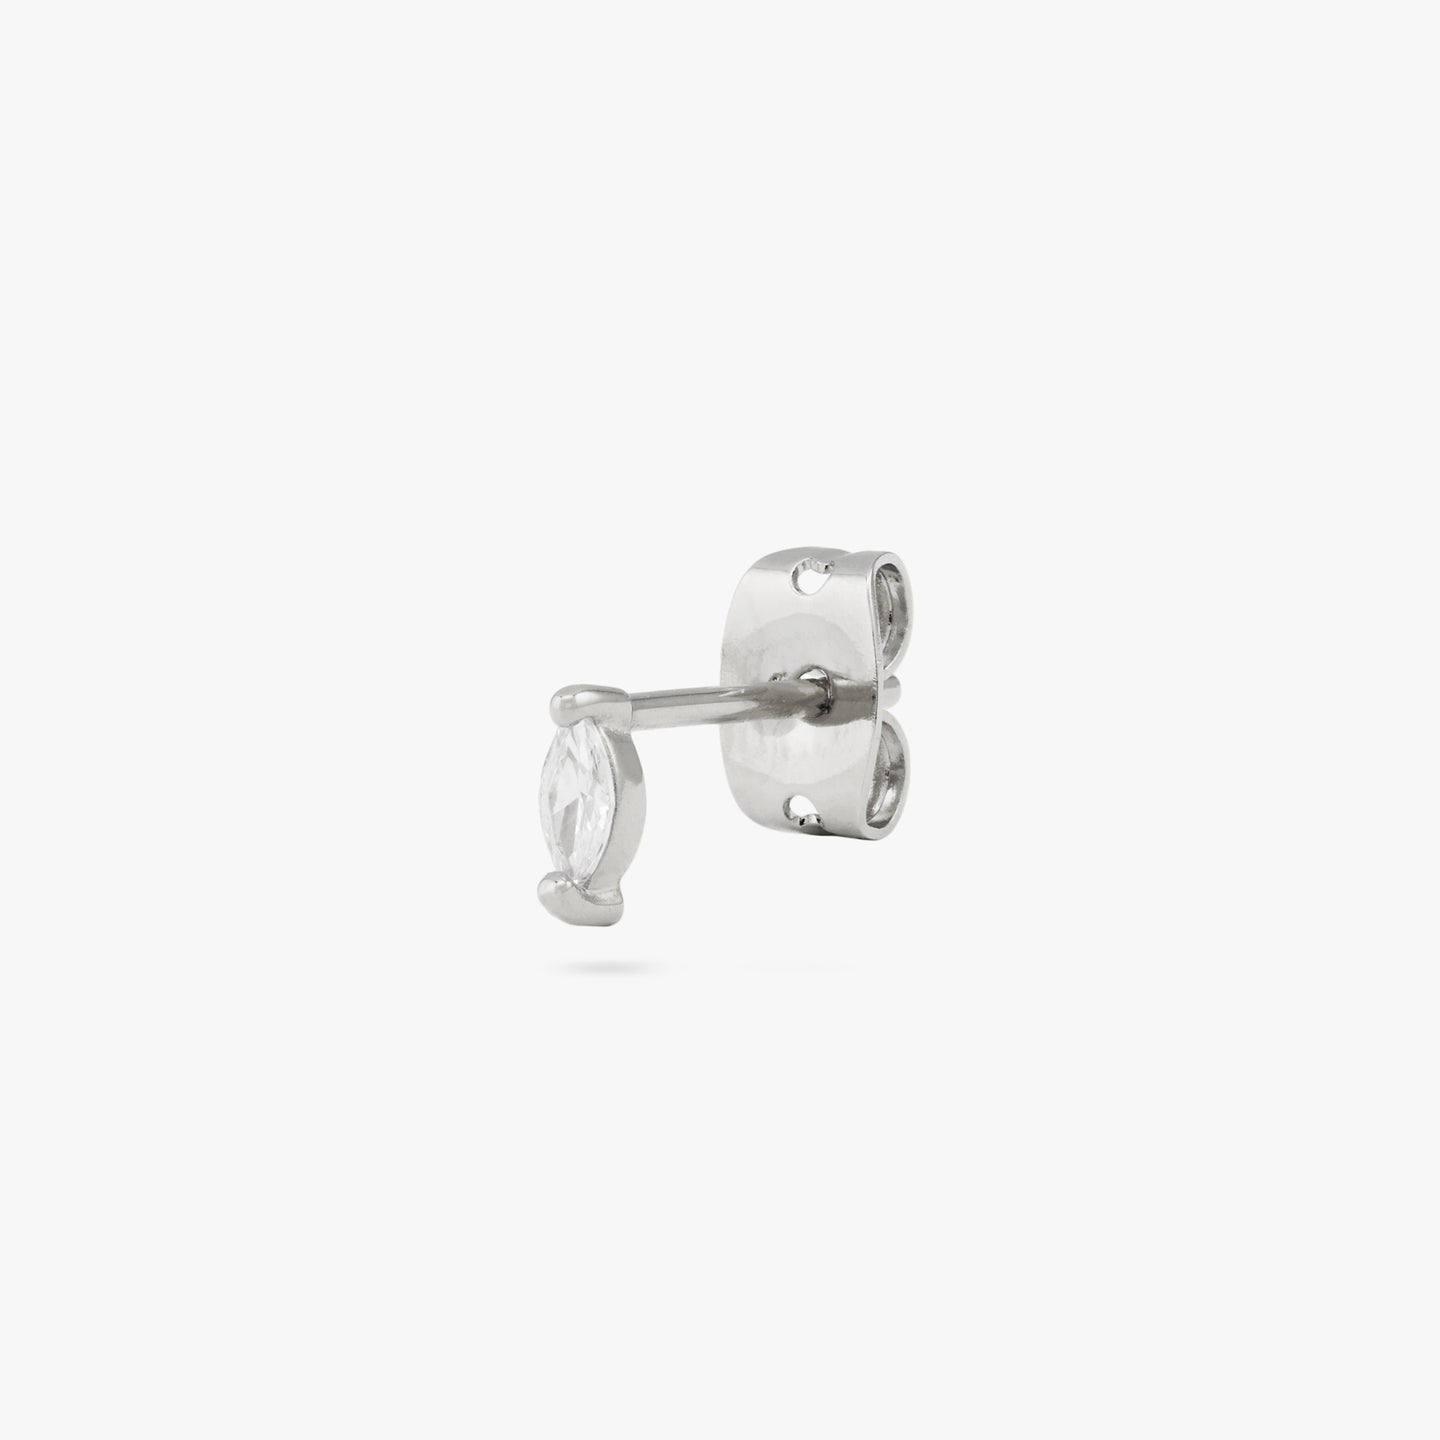 The marquise mini stud features a clear oblong shaped gem and has silver accents color:null|silver/clear